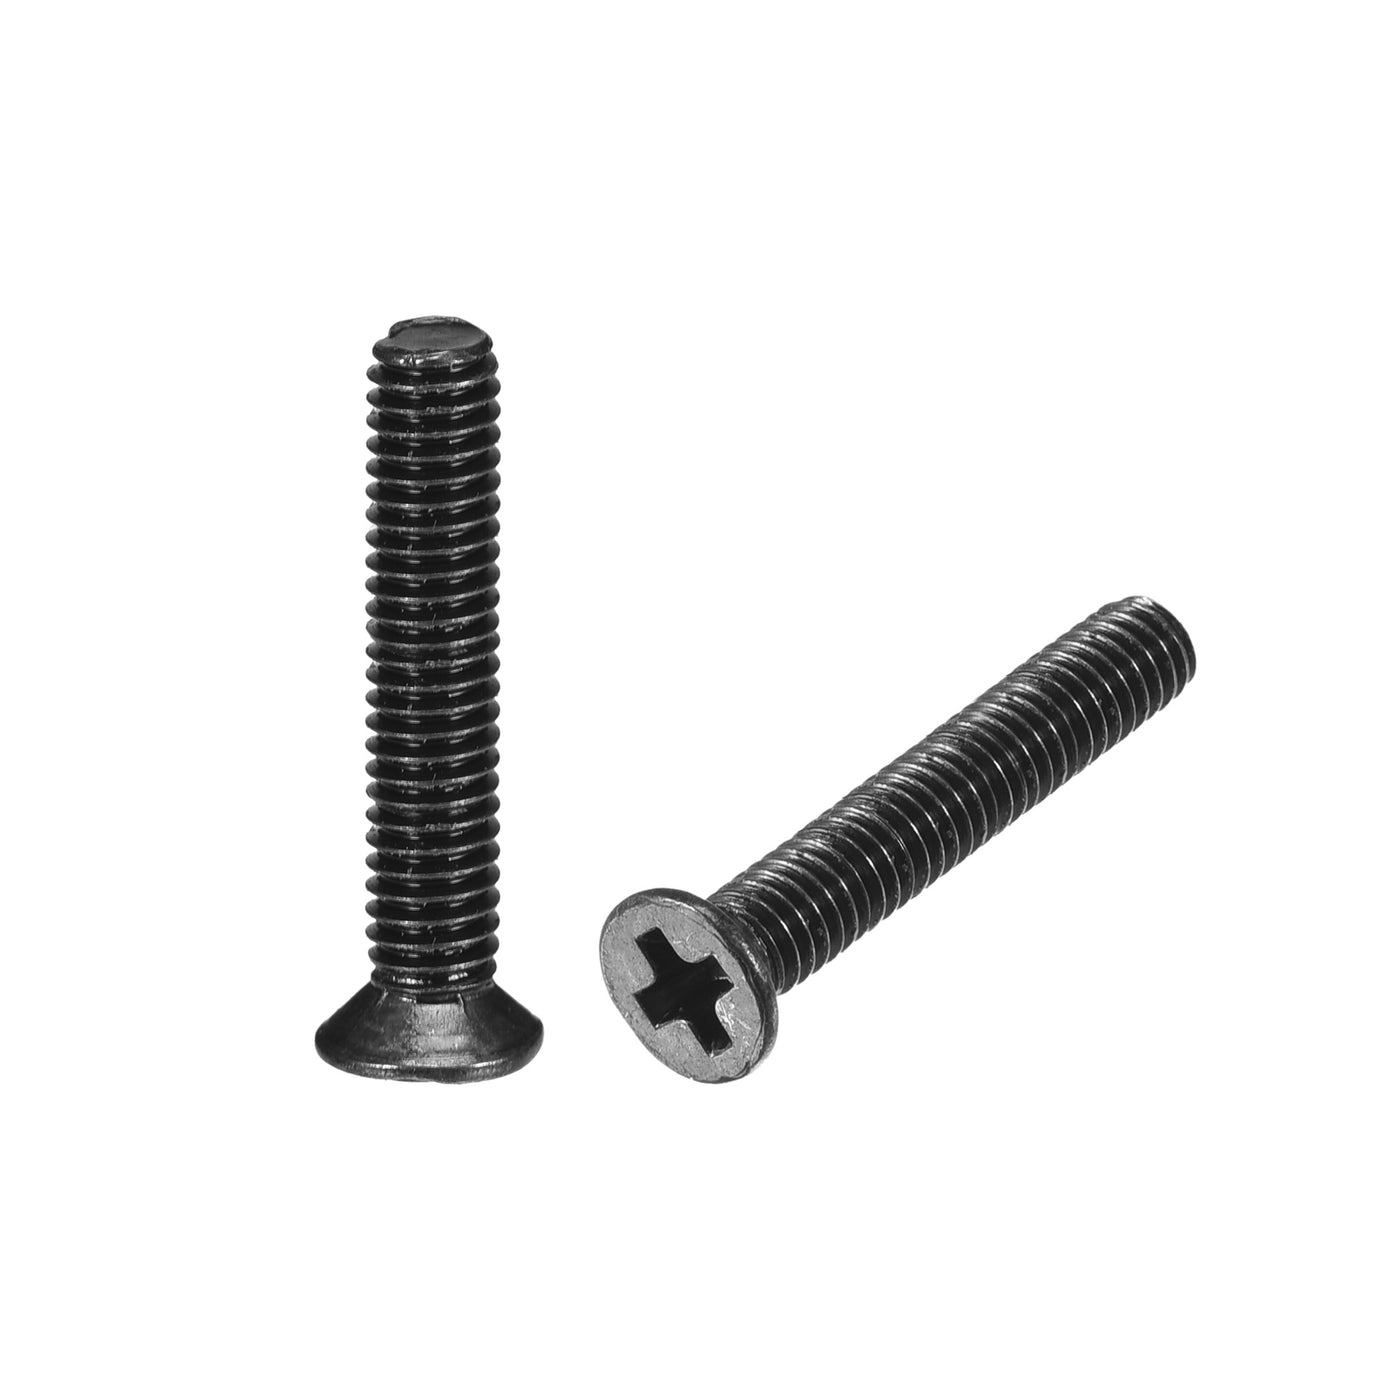 uxcell Uxcell M2.5 x 14mm Phillips Flat Head Screws Carbon Steel Machine Screws Black for Home Office Computer Case Appliance Equipment 350pcs